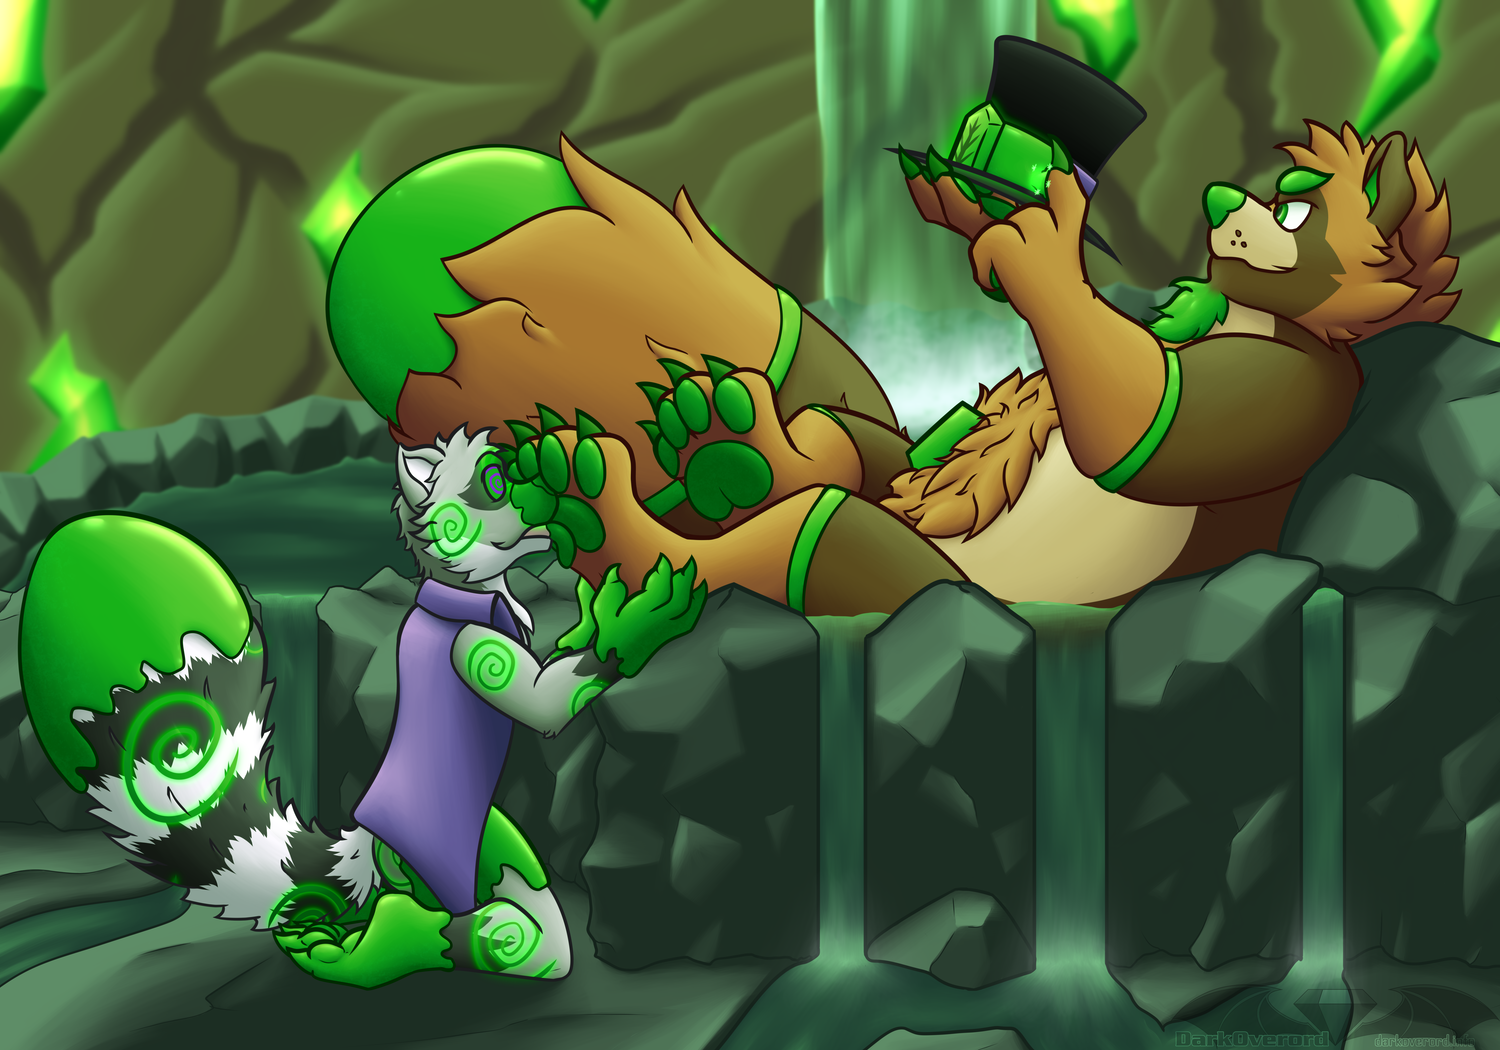 Allison Towers, a raccoon who has green painted spirals on them as parts of their body is transforming in to green gemstone, lapping and servicing Okana's paws.

Okana, a tanuki, sat in a bath as his paws are serviced, is smirking as he attaches a green leaf gem stone on to Allison's hat, as well as coating the purple band with that same green gem paint